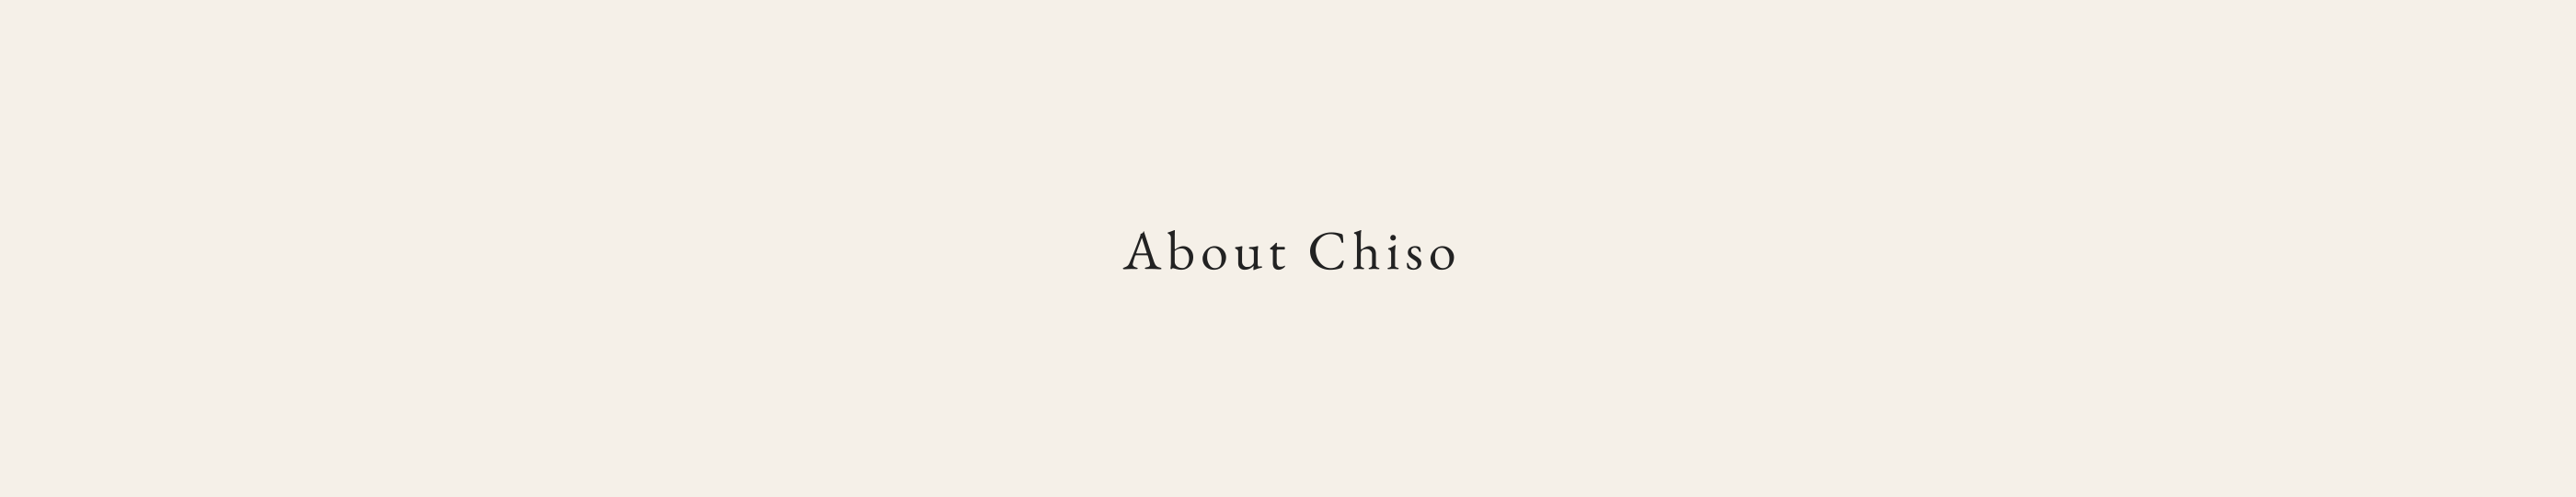 About Chiso